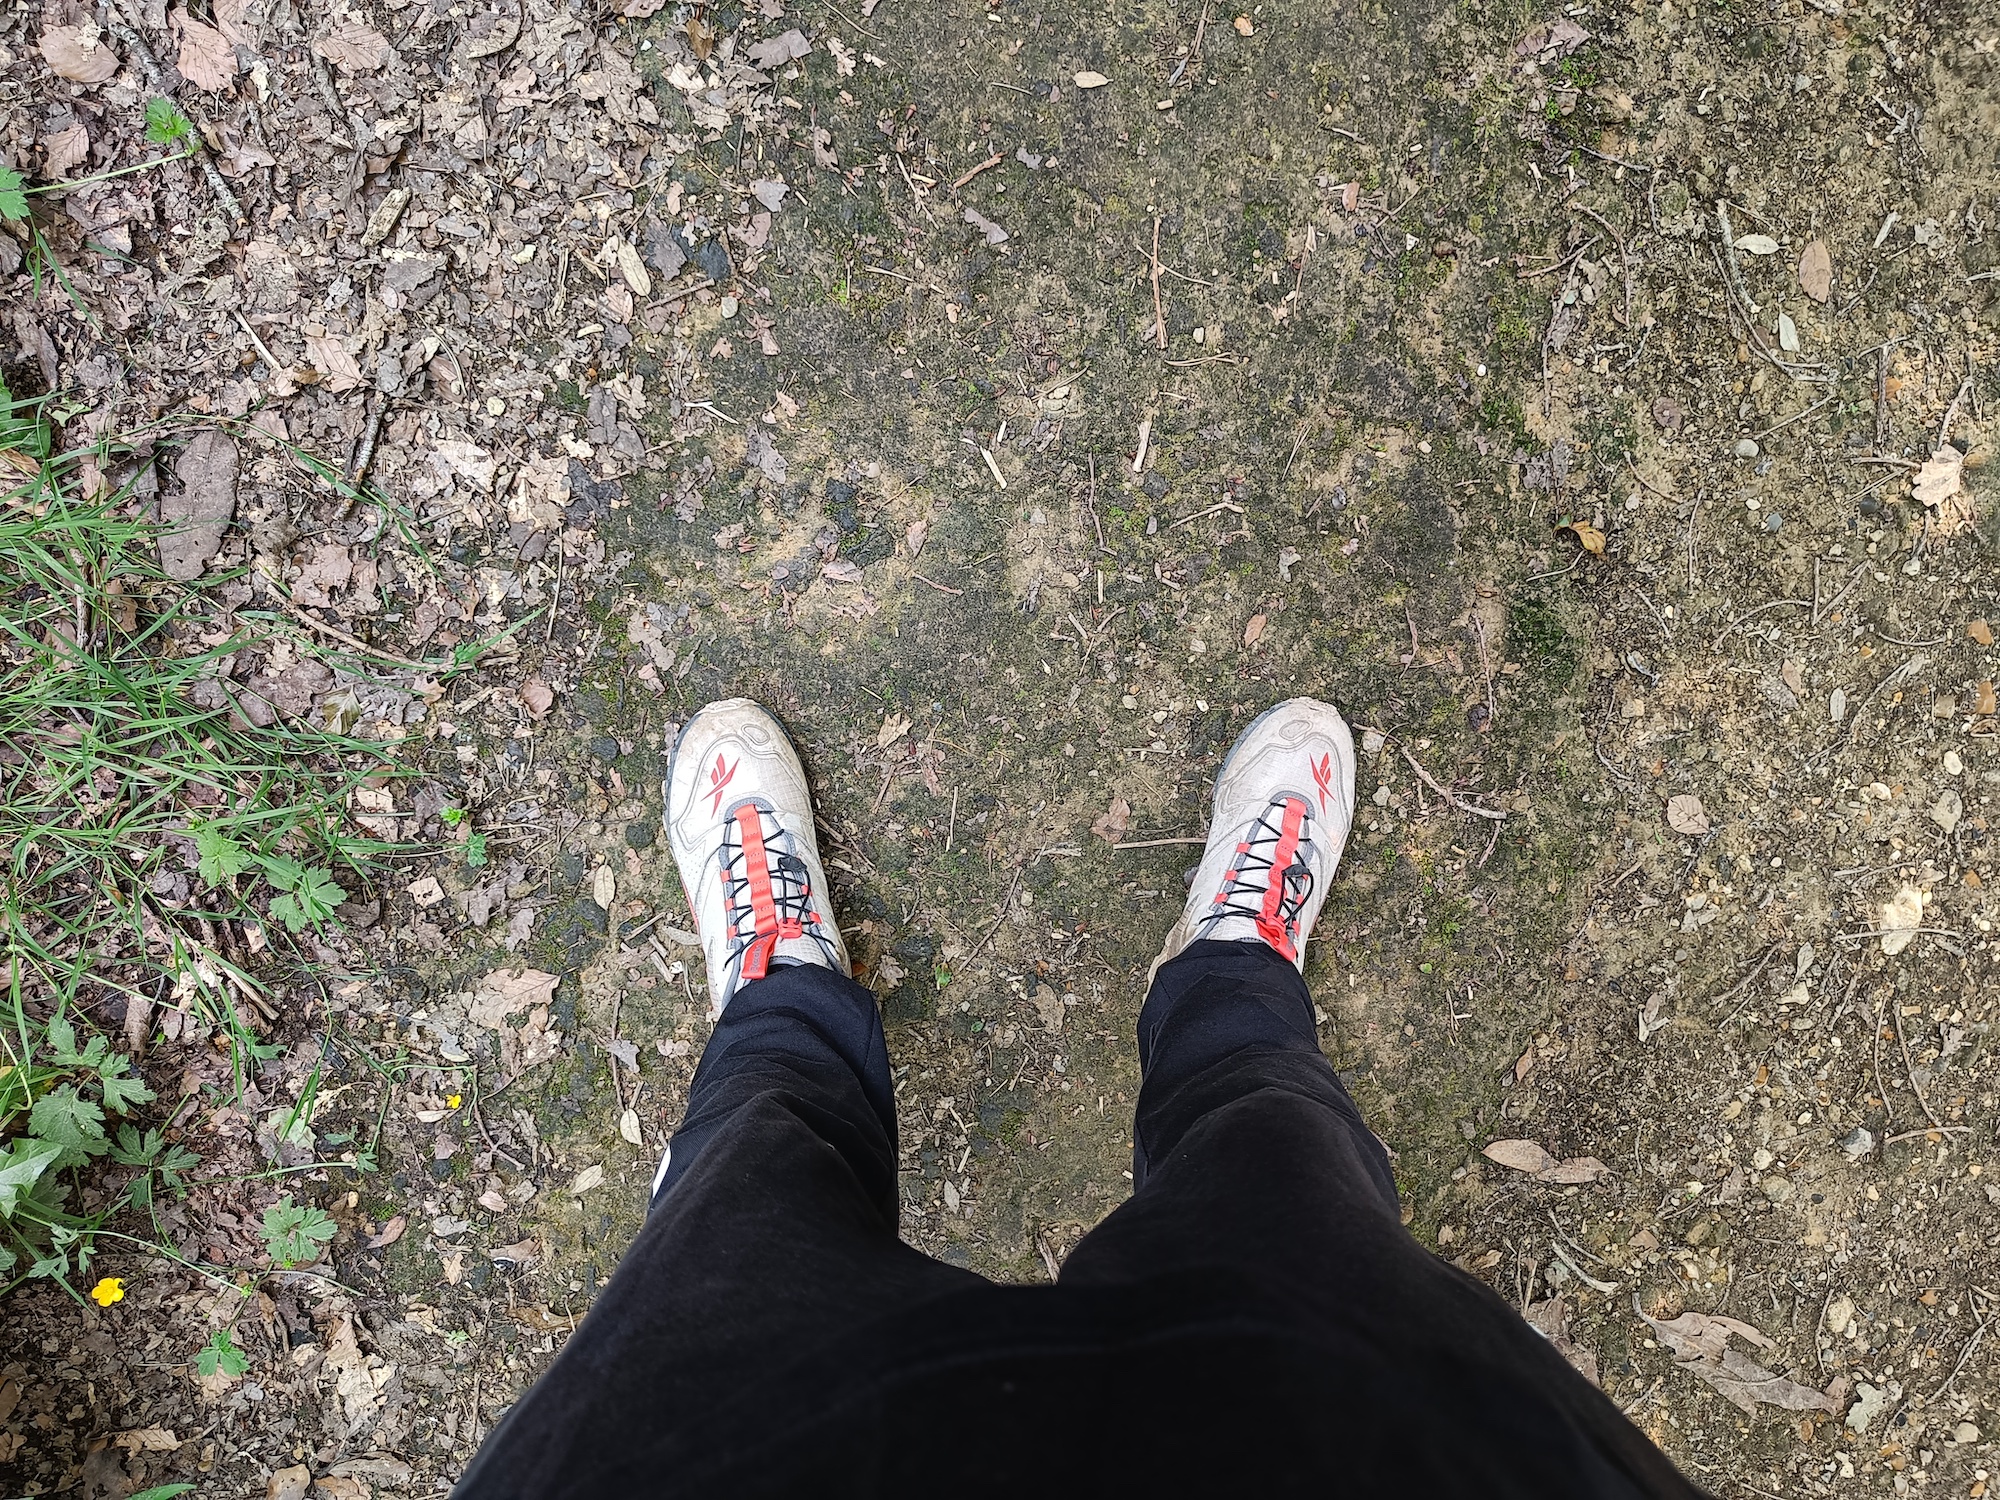 Photo taken by the OnePlus Nord 2, looking down at feet.